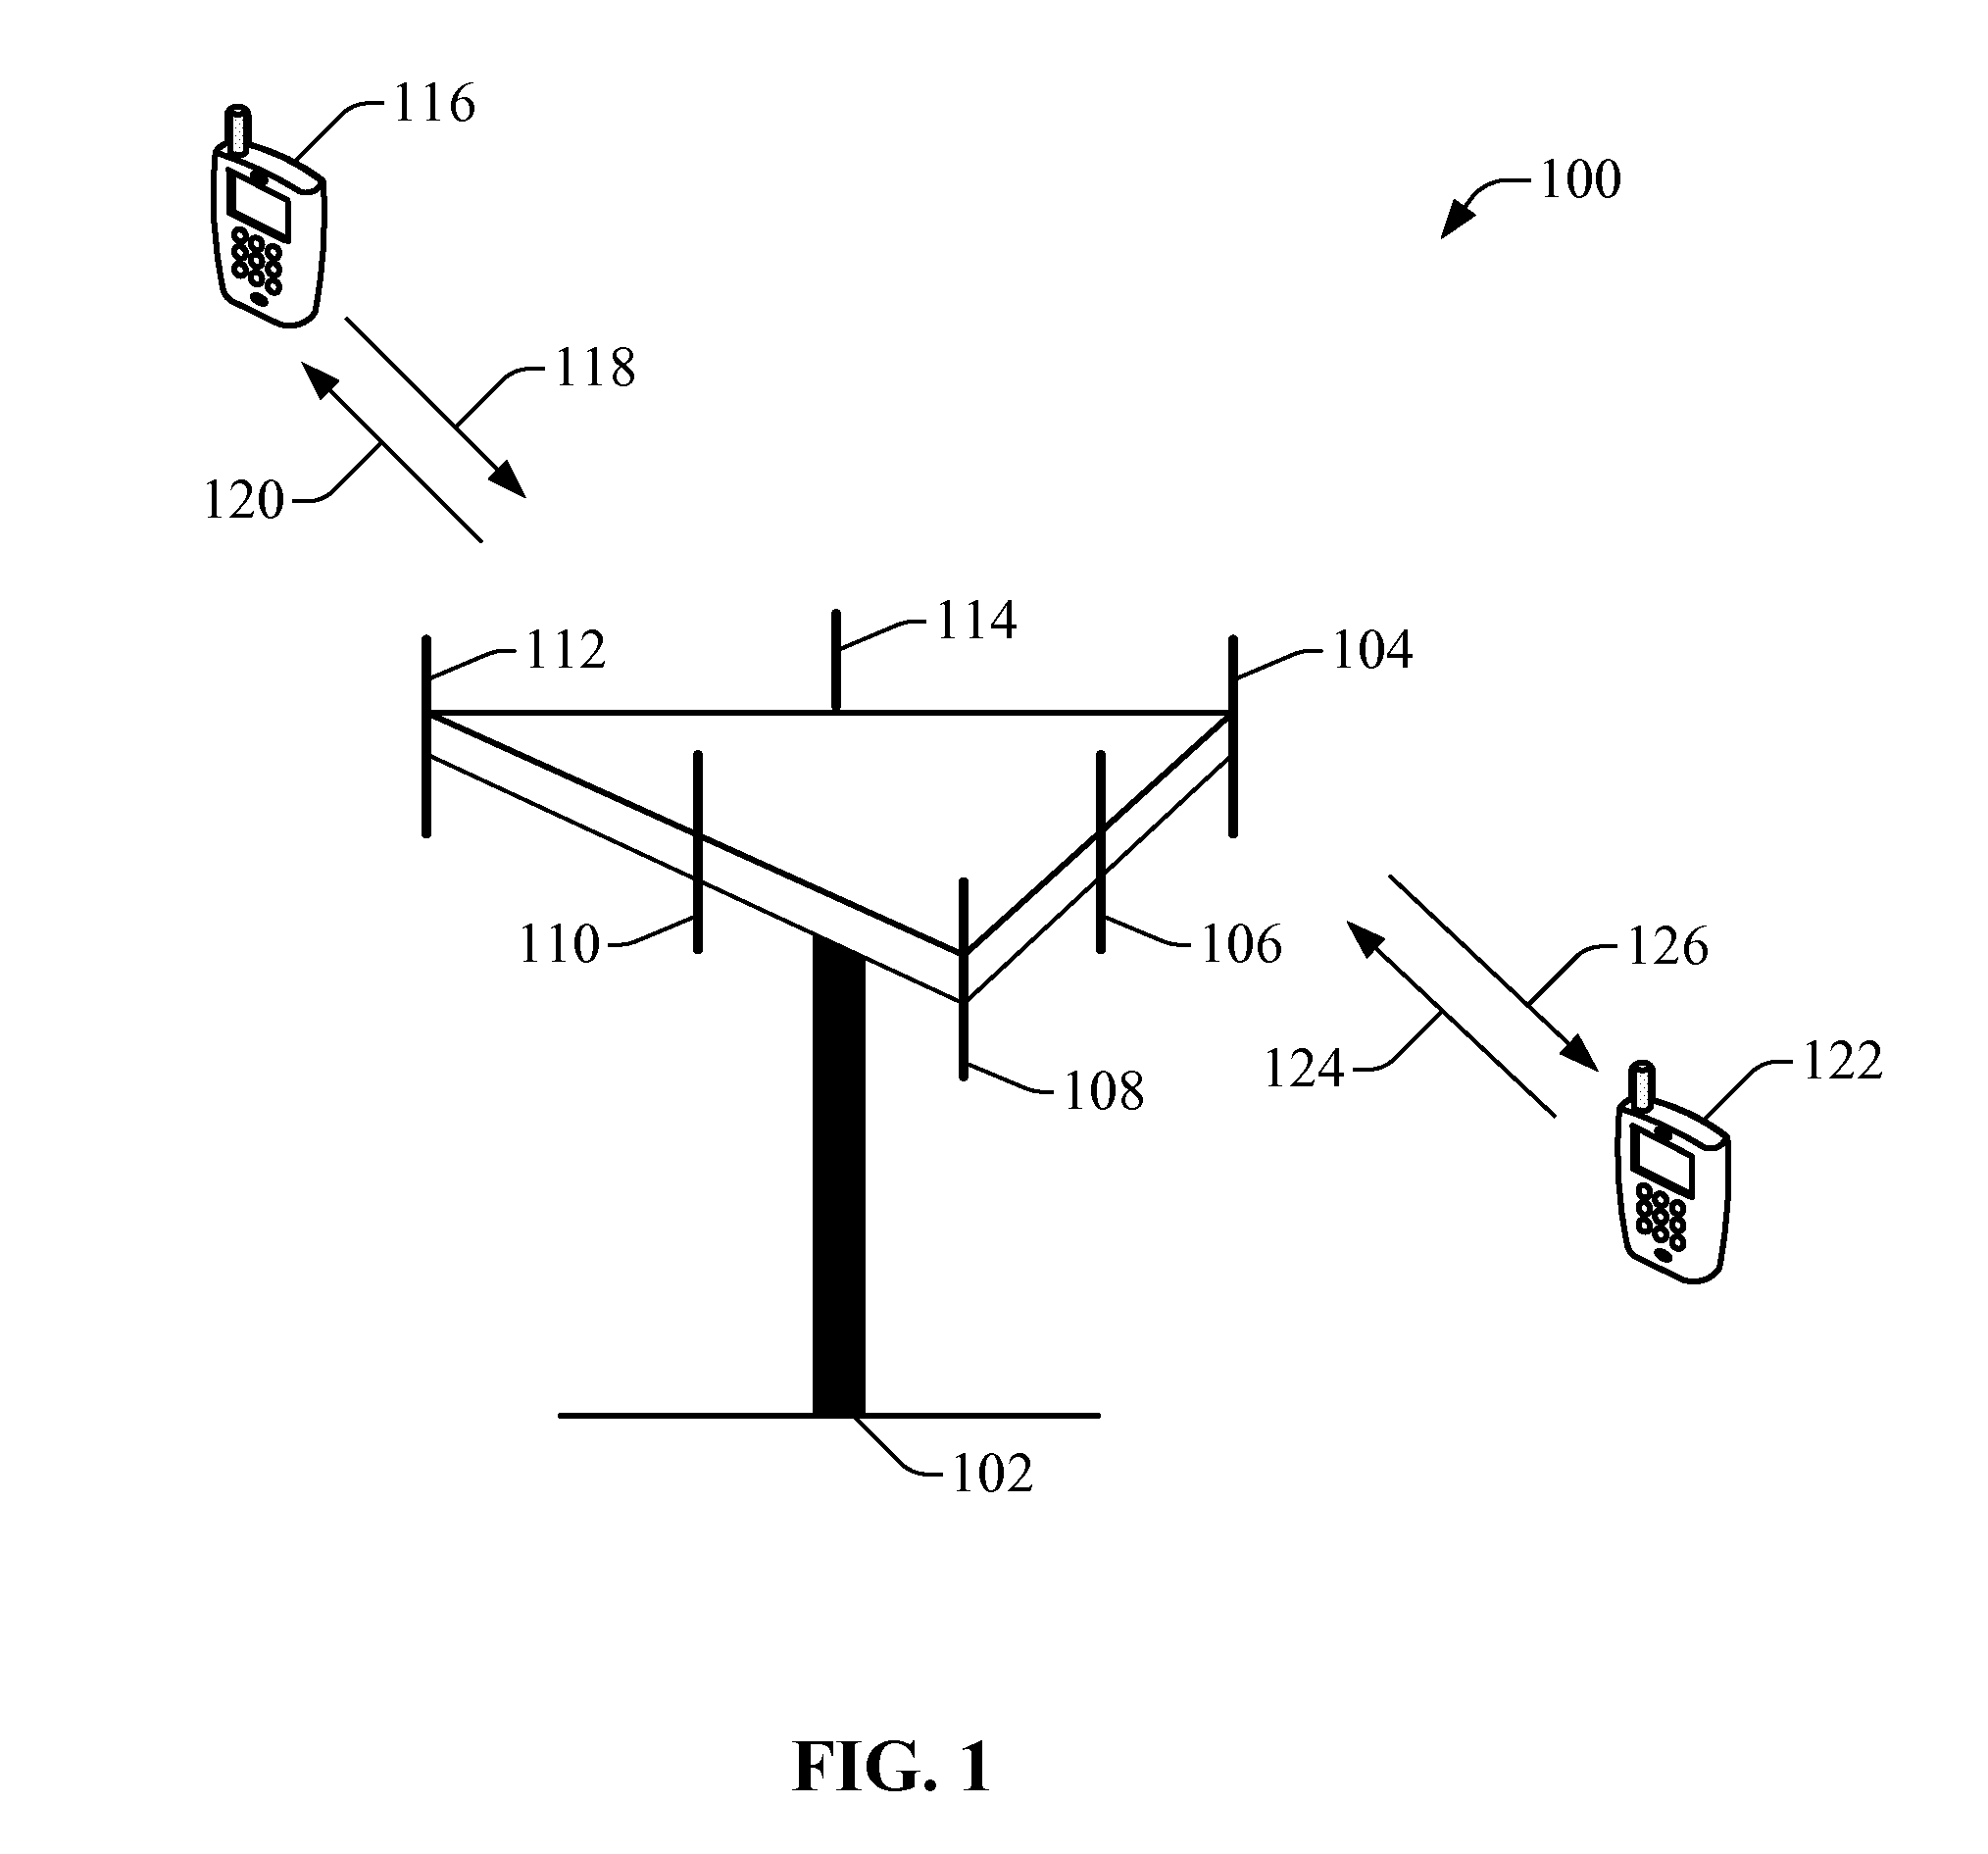 Positioning reference signals in a telecommunication system